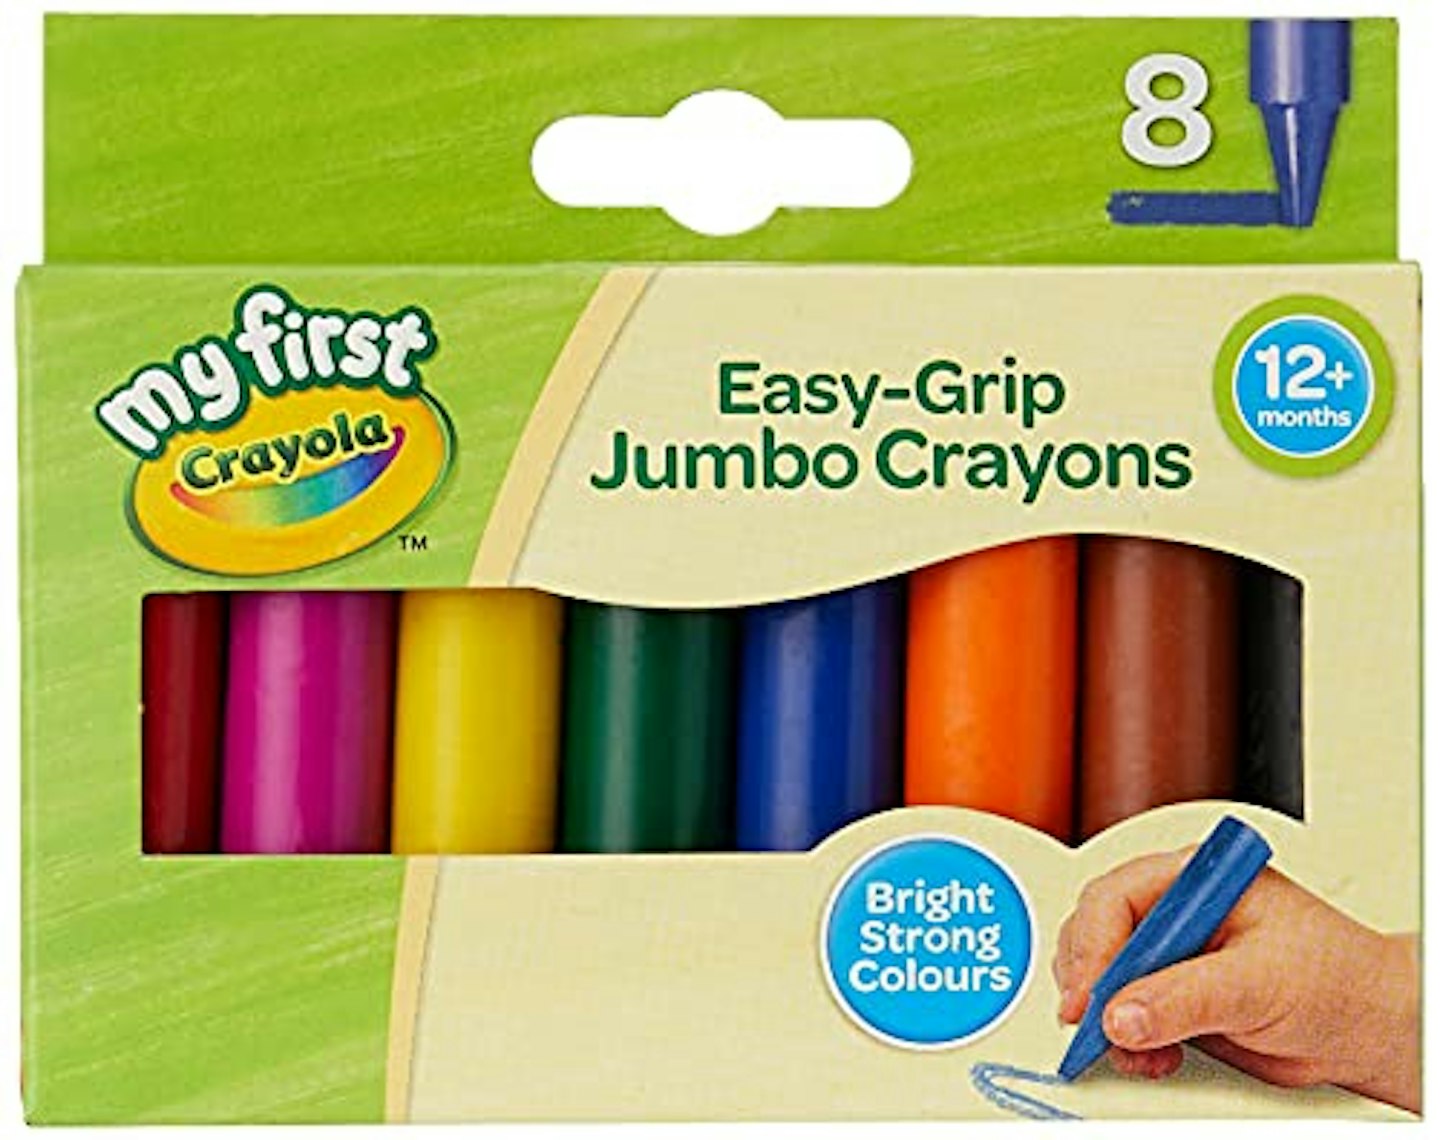 Great Choice Products Jumbo Crayons For Toddlers, 6 Colors